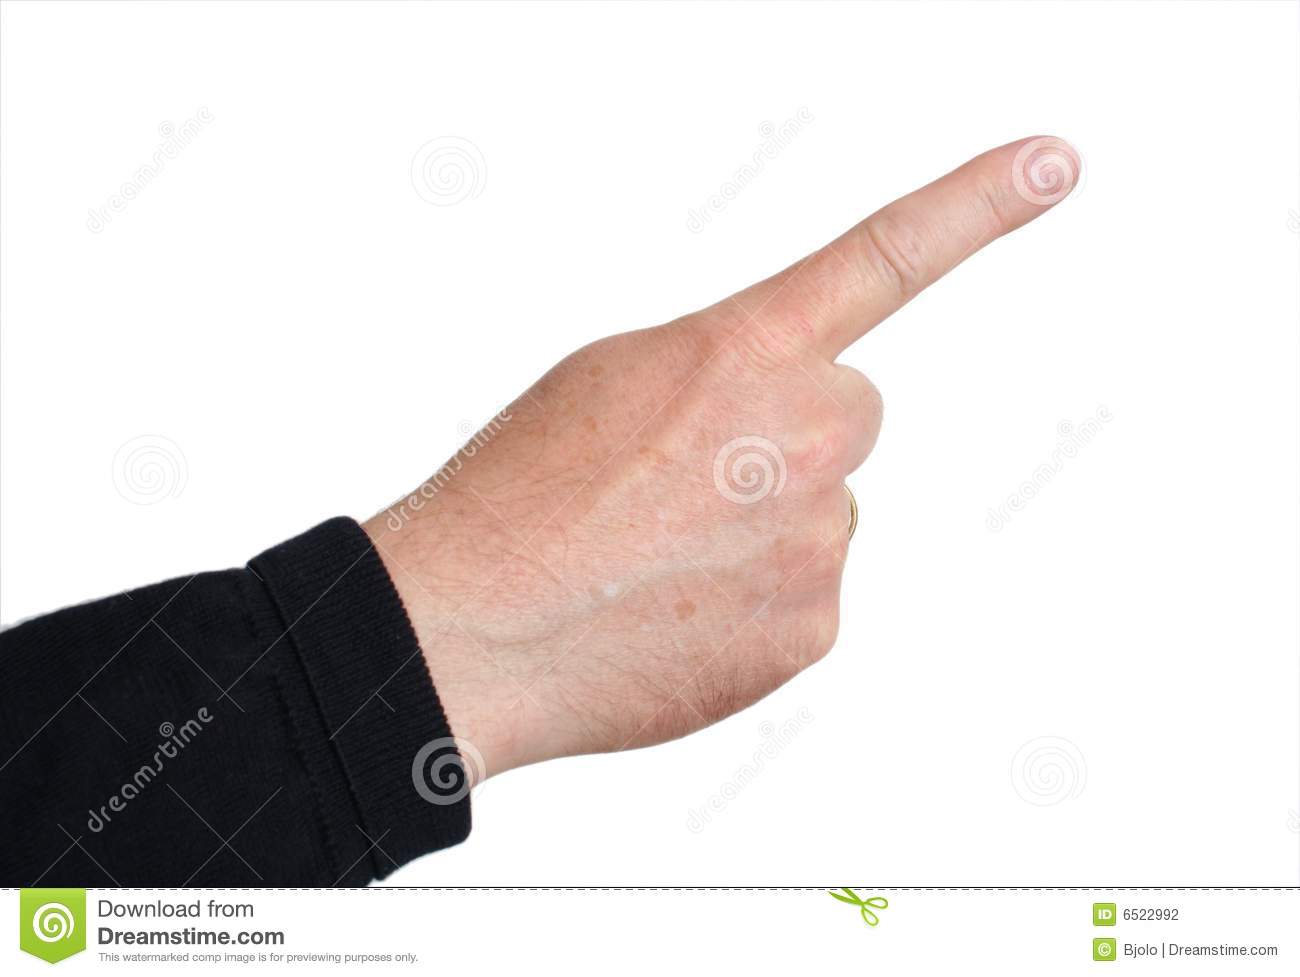 Male Right Hand With Index Finger Pointing  Middle Aged Skin Type